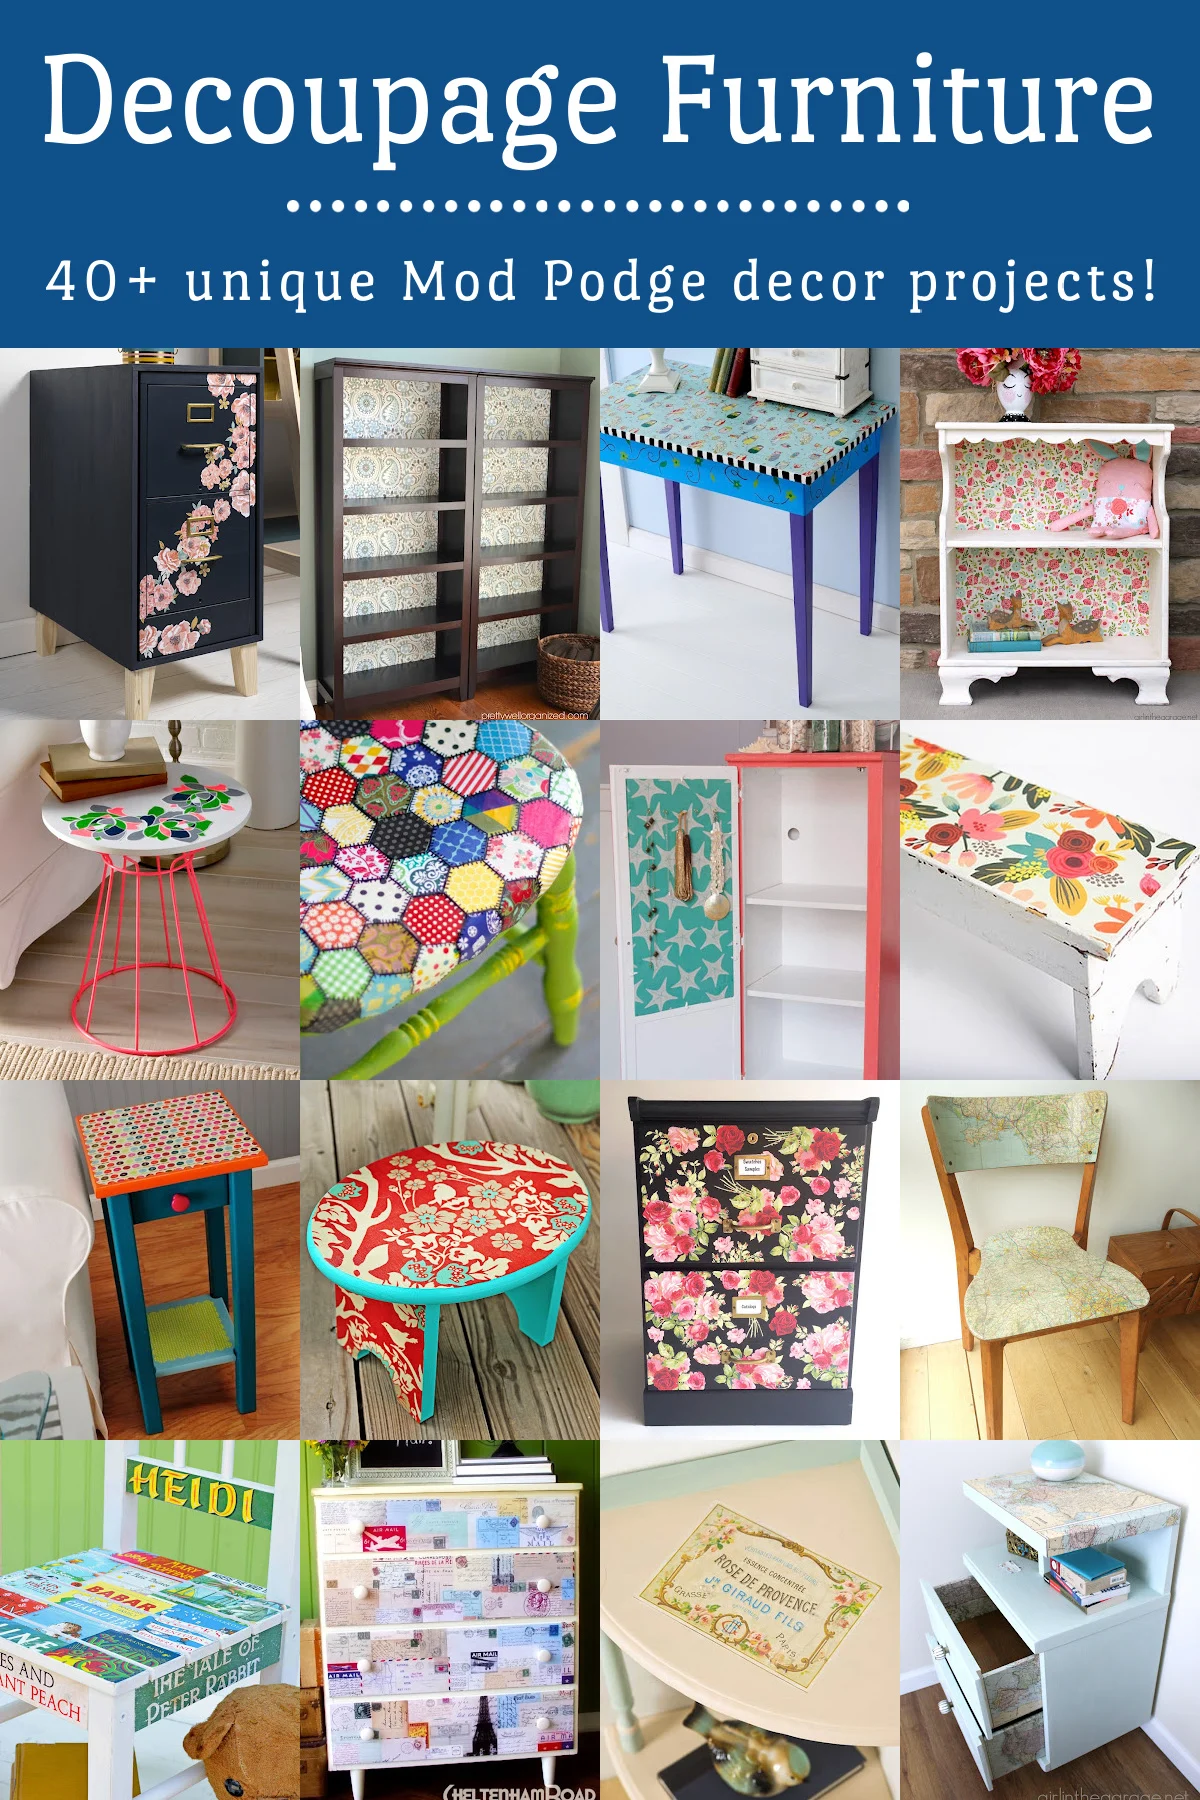 How to Mod Podge Fabric to Wood Furniture  Mod podge fabric, Mod podge  furniture, Decoupage furniture